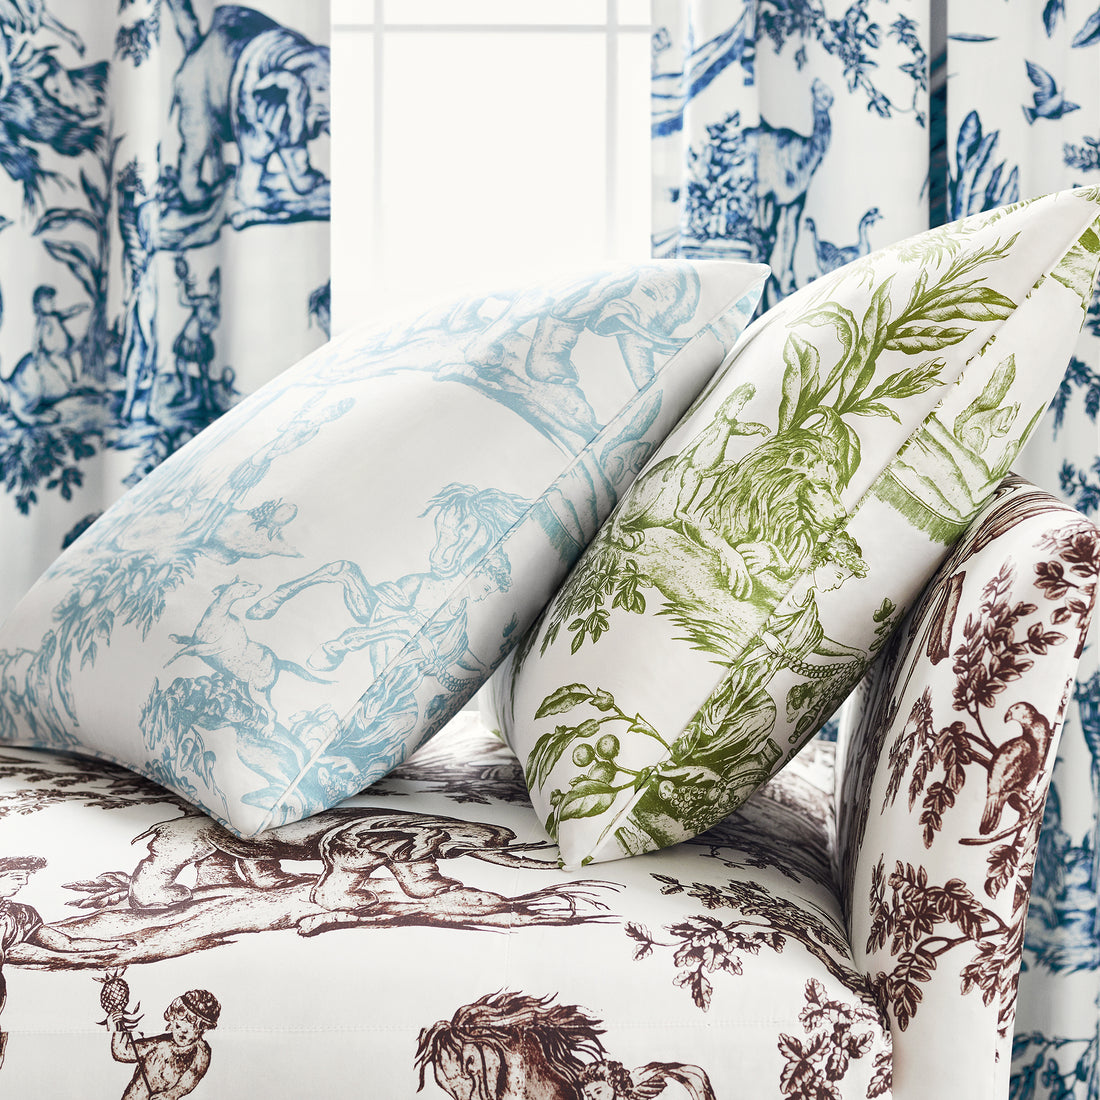 Pillow in Antilles Toile printed fabric in Green - pattern number AF15172 - by Anna French in the Antilles collection